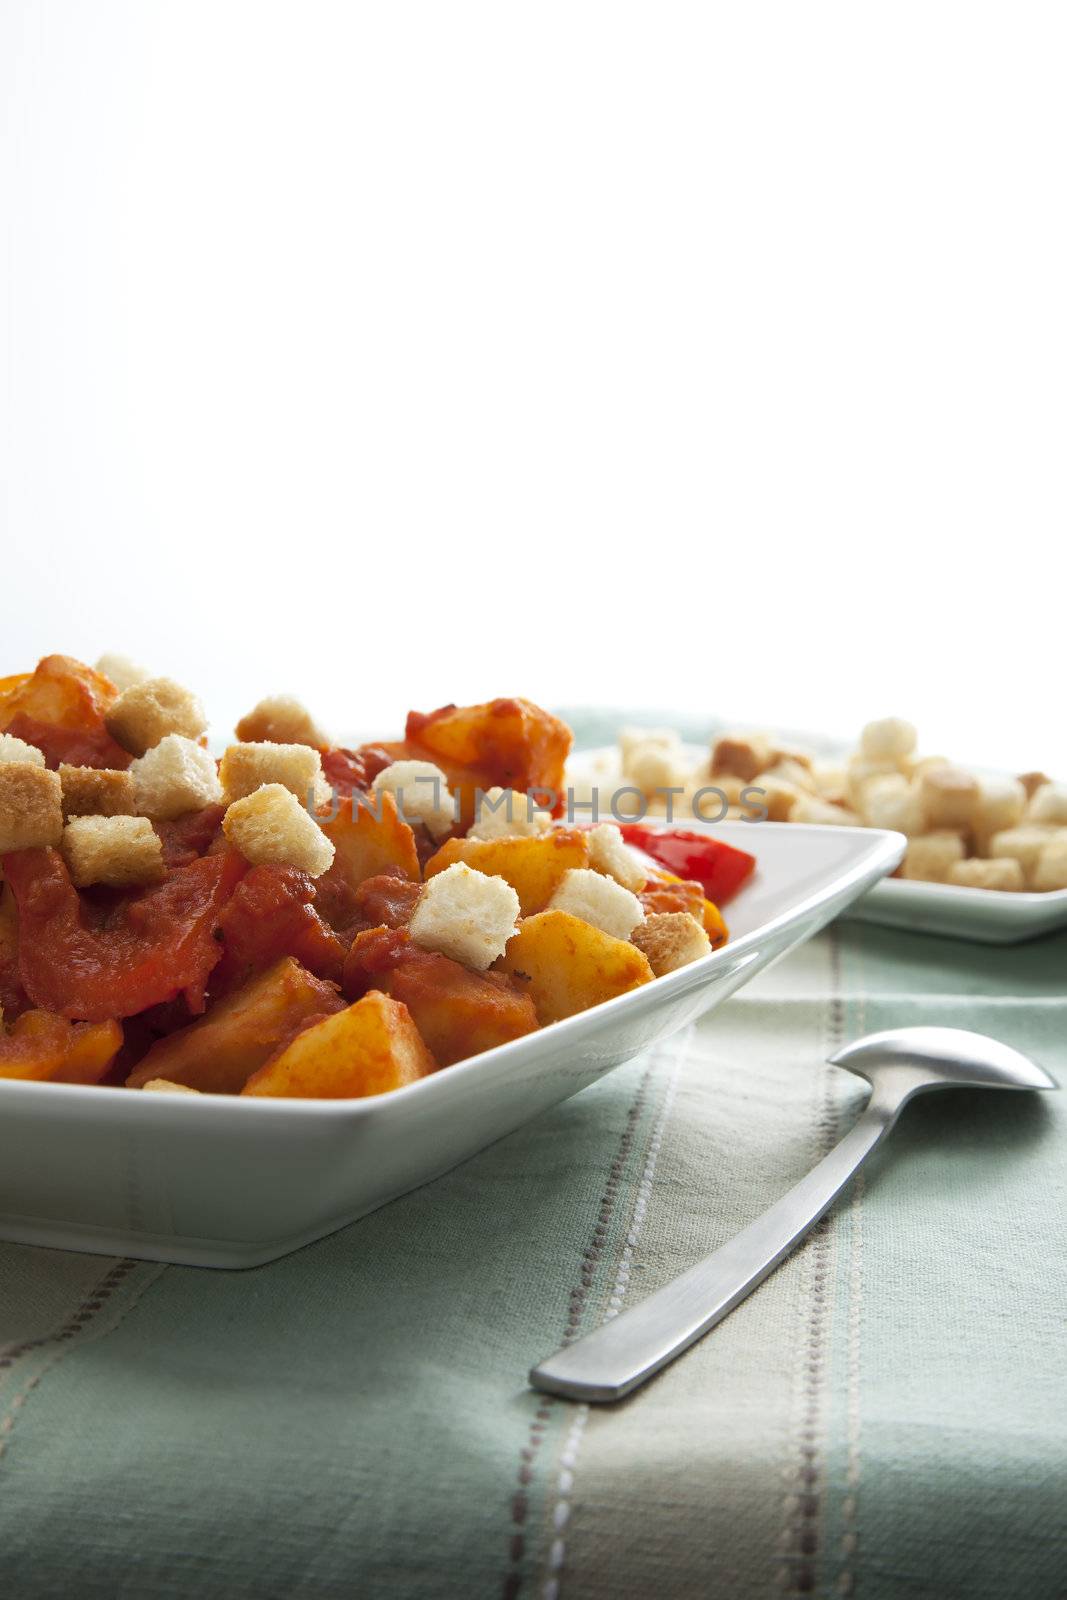 Vegetarian version of hungarian goulash with potatoes and peppers and croutons.